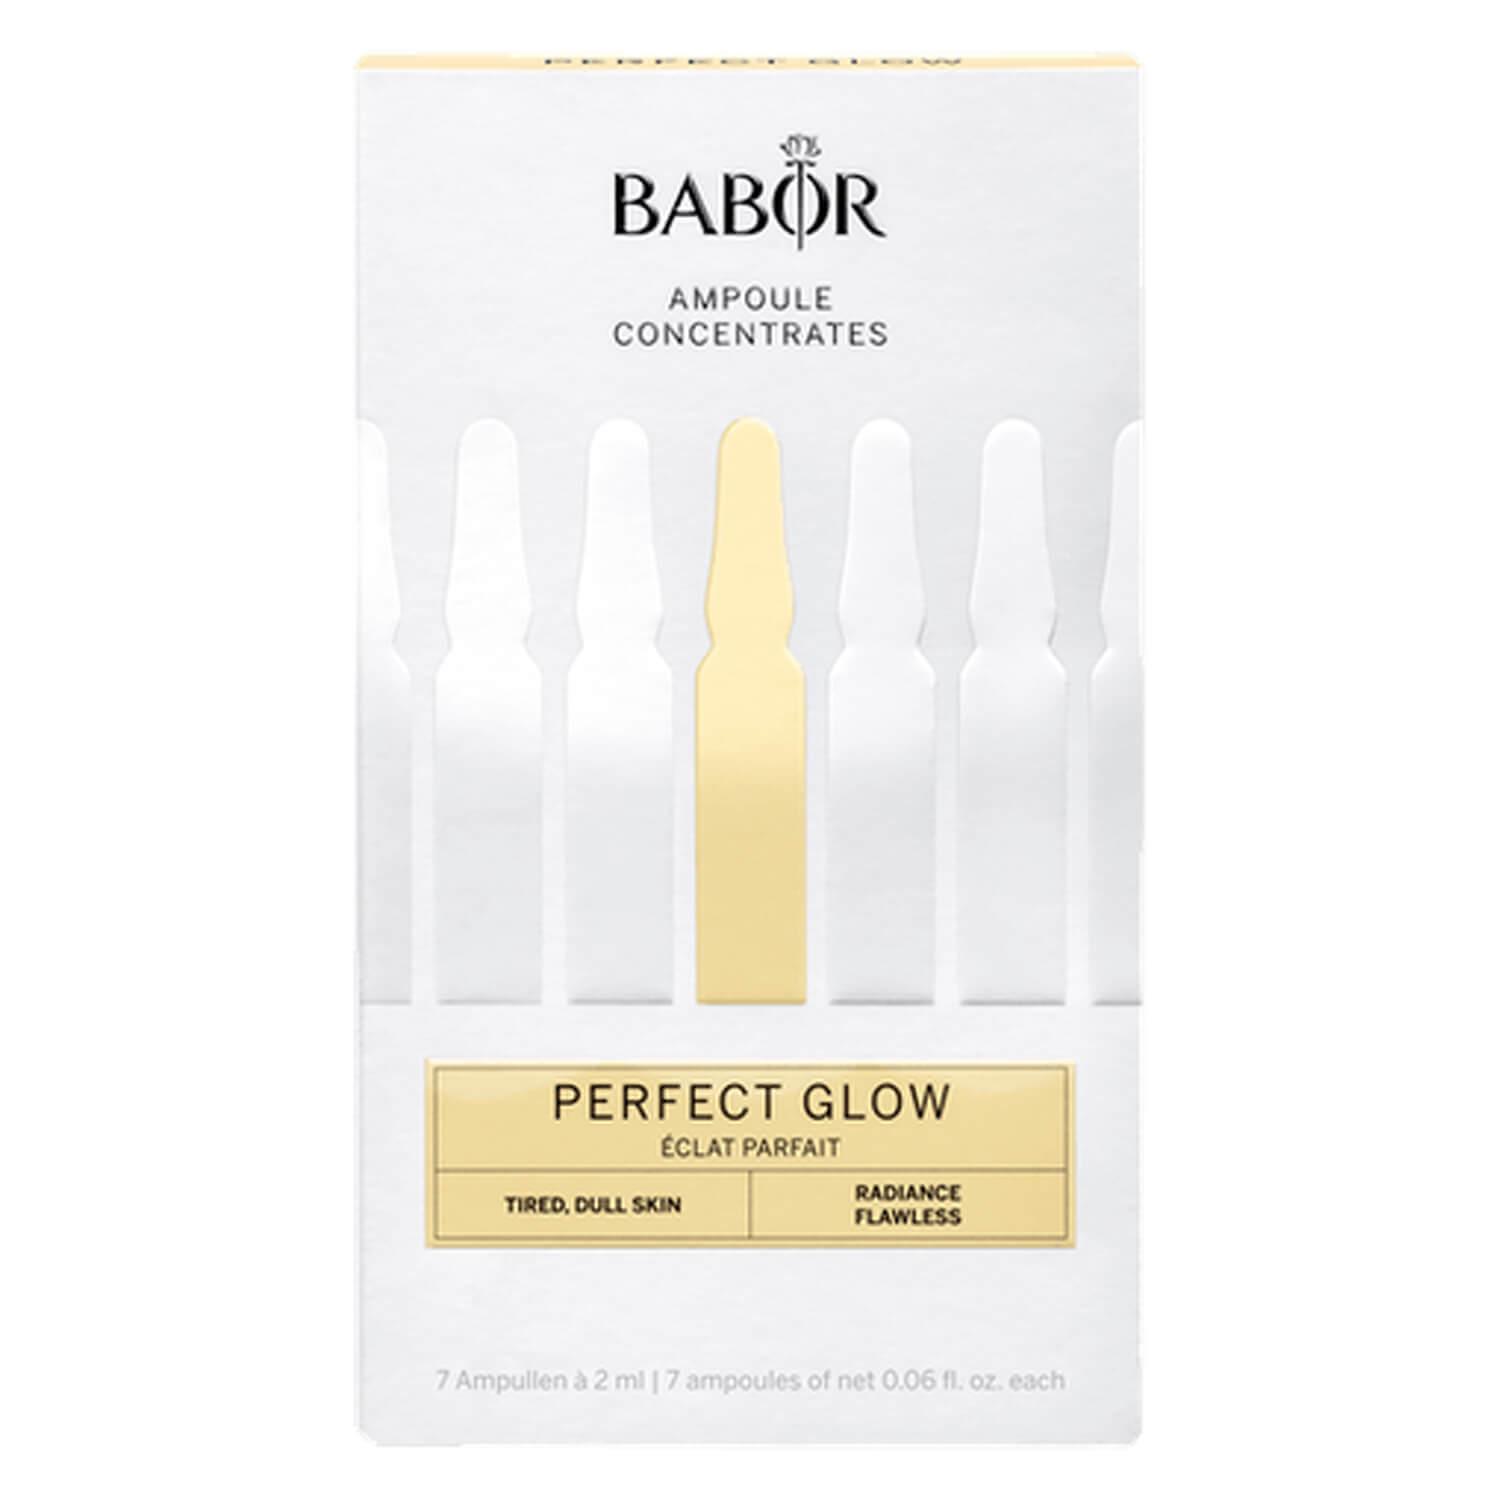 BABOR AMPOULE CONCENTRATES - Perfect Glow